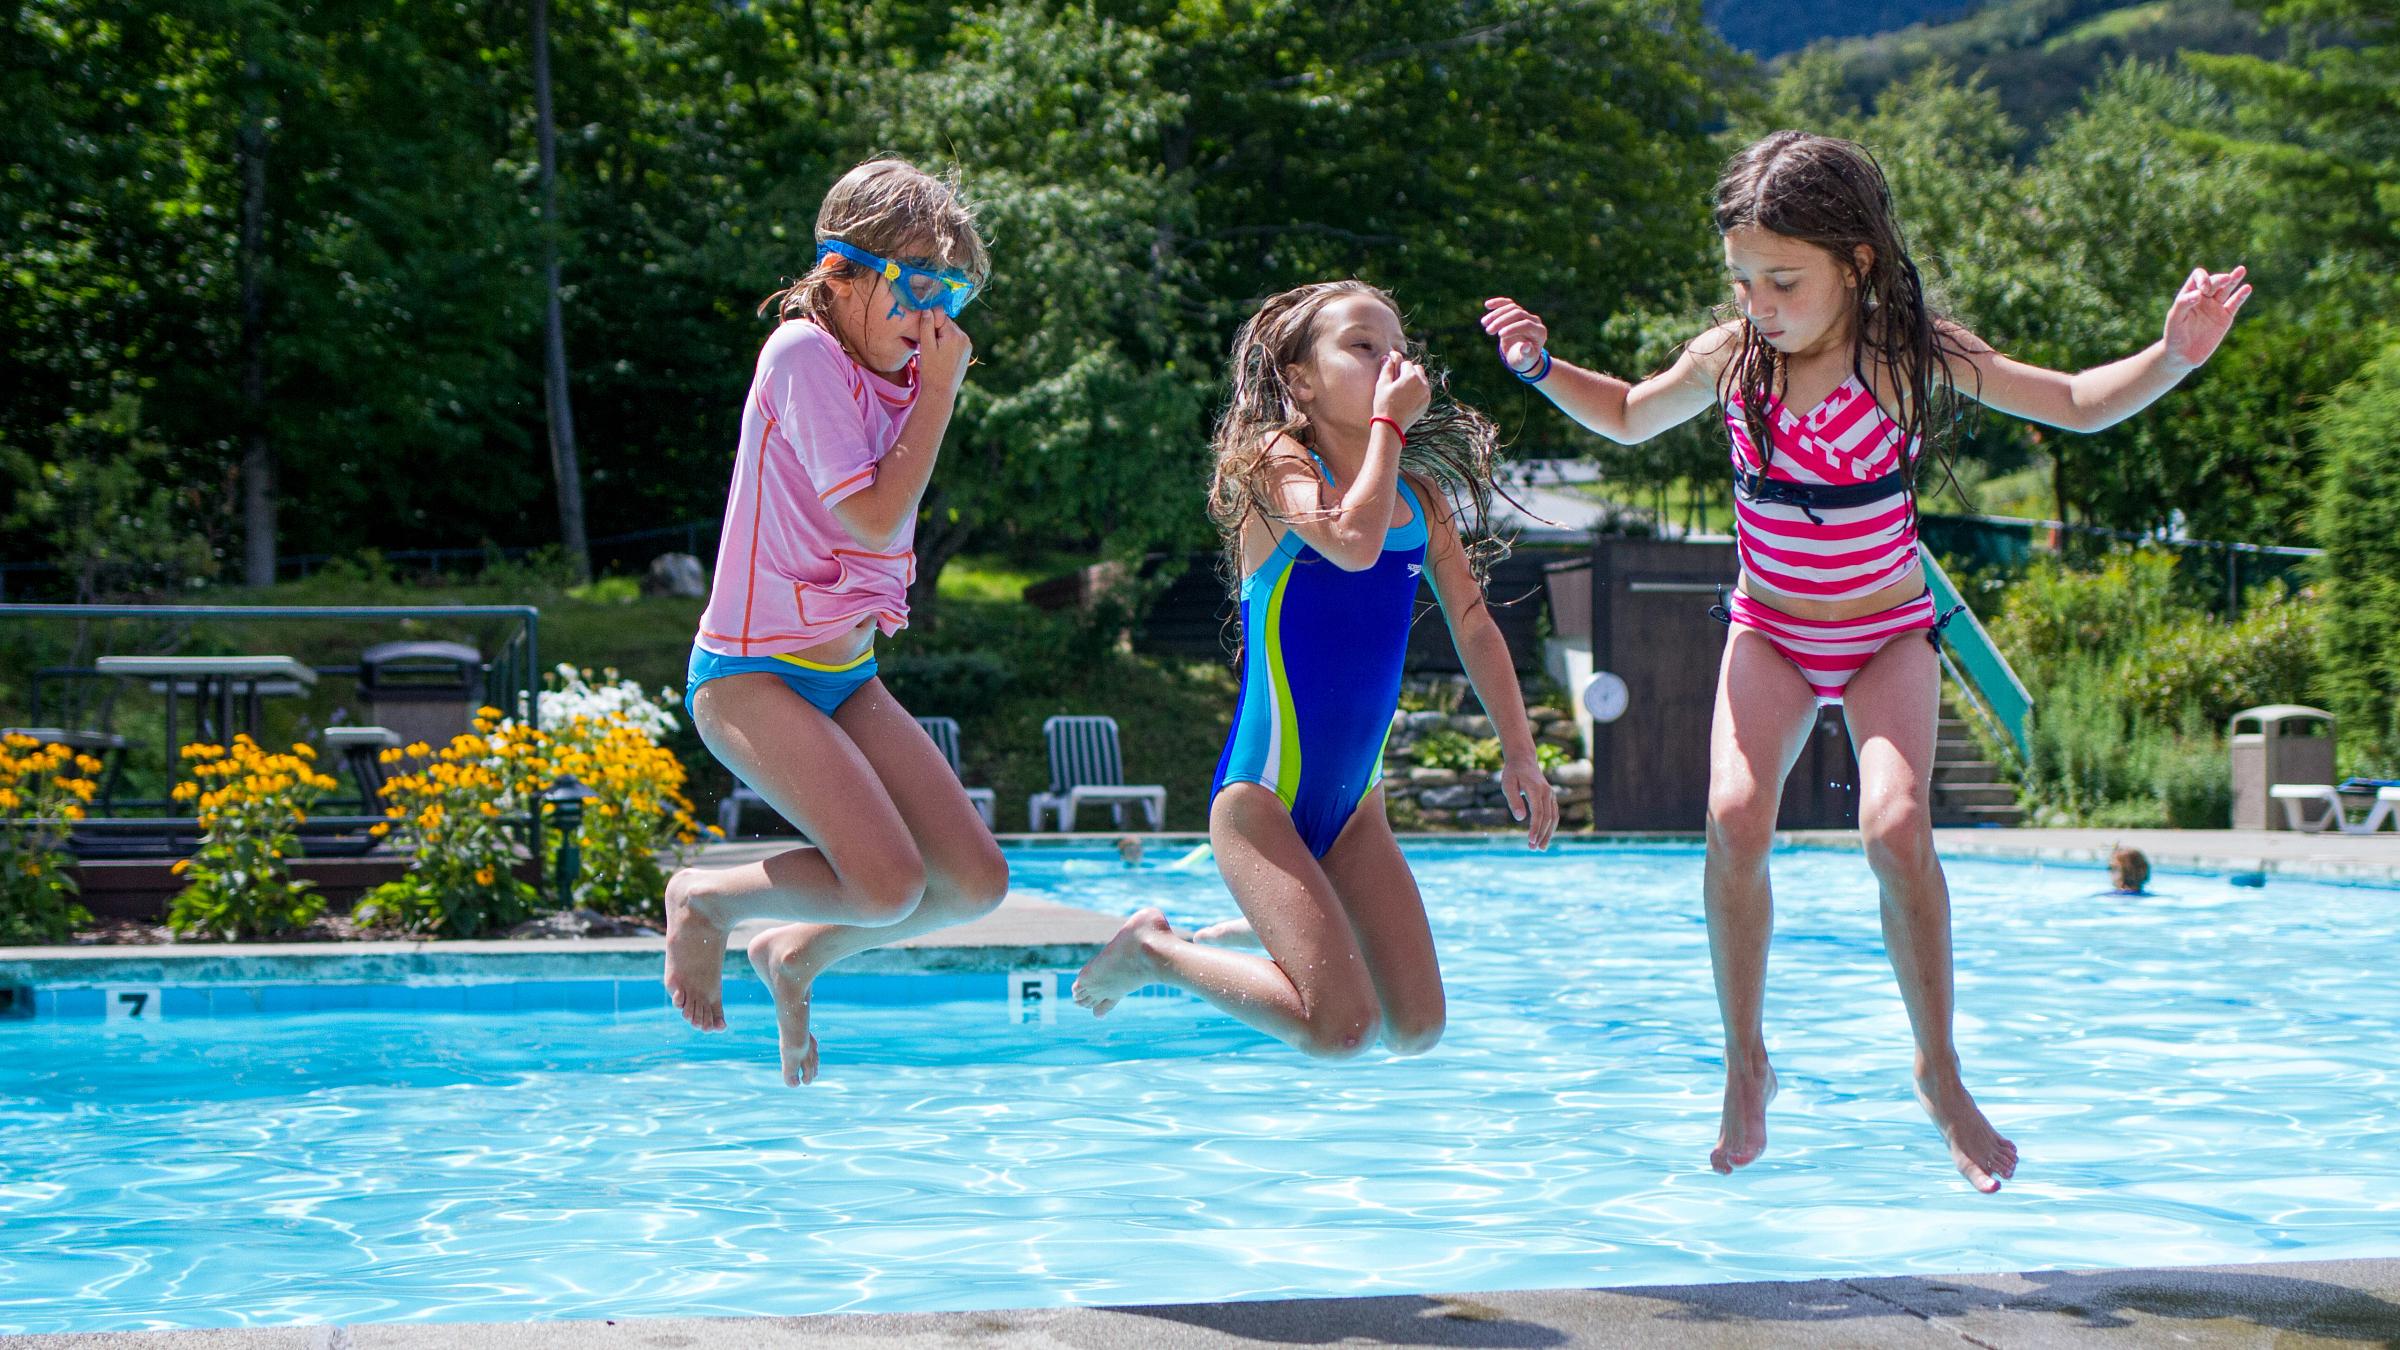 Kids jumping into the pool